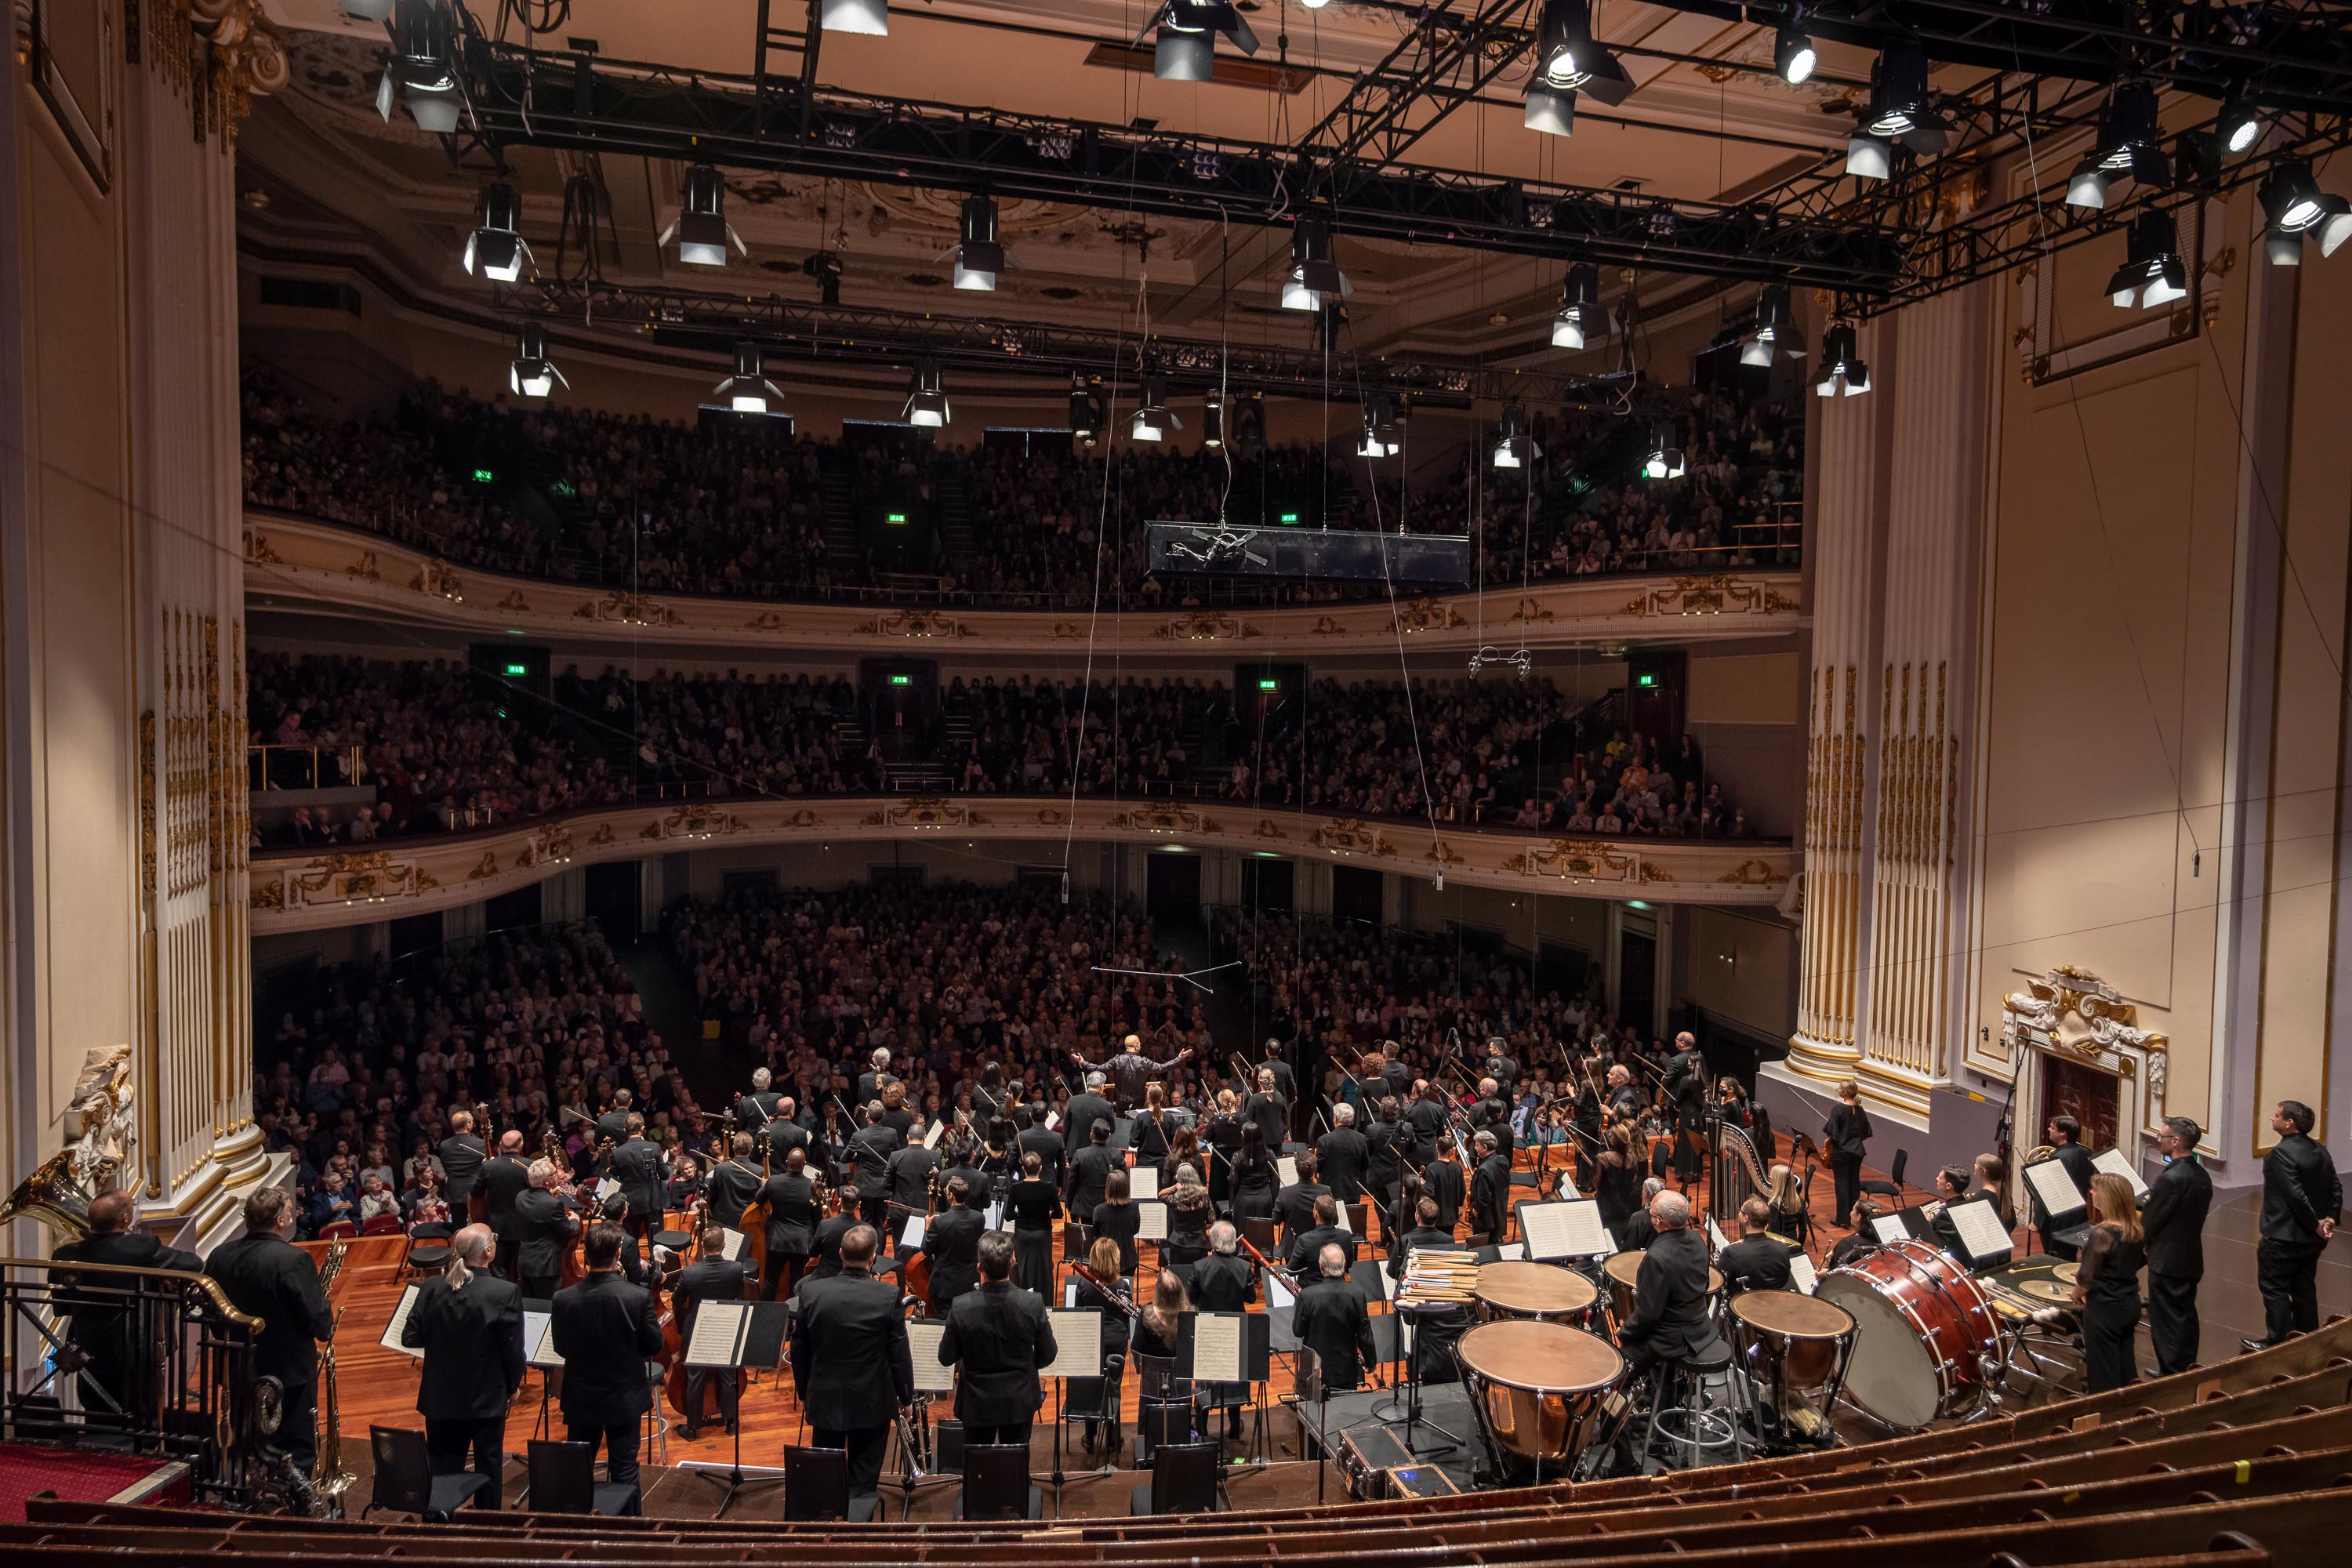 The Orchestra is welcomed by a sold-out audience at Usher Hall